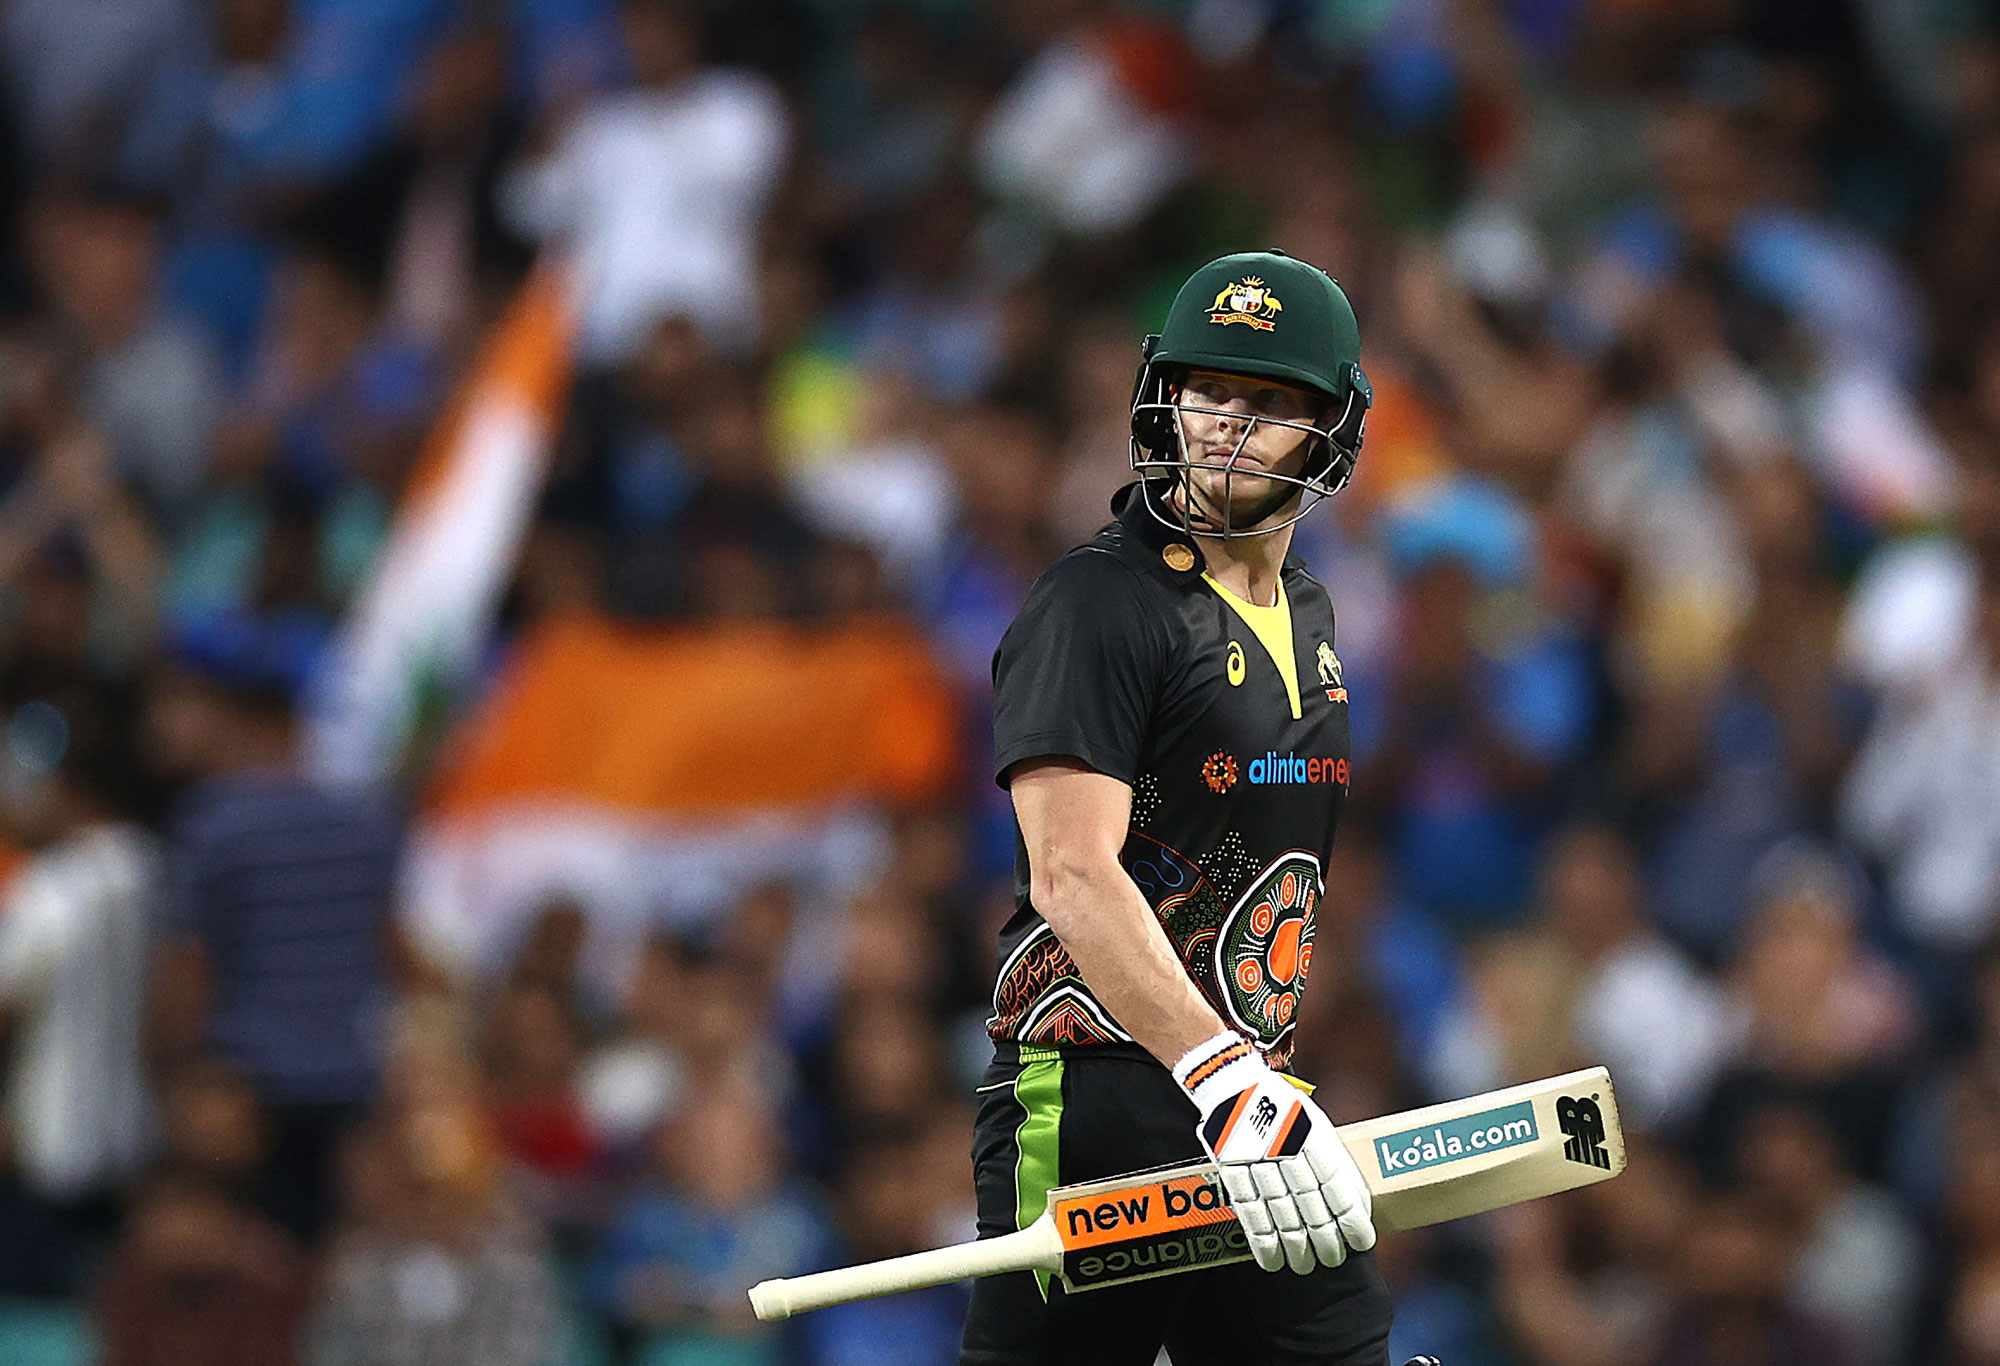 Steve Smith of Australia looks dejected after being dismissed